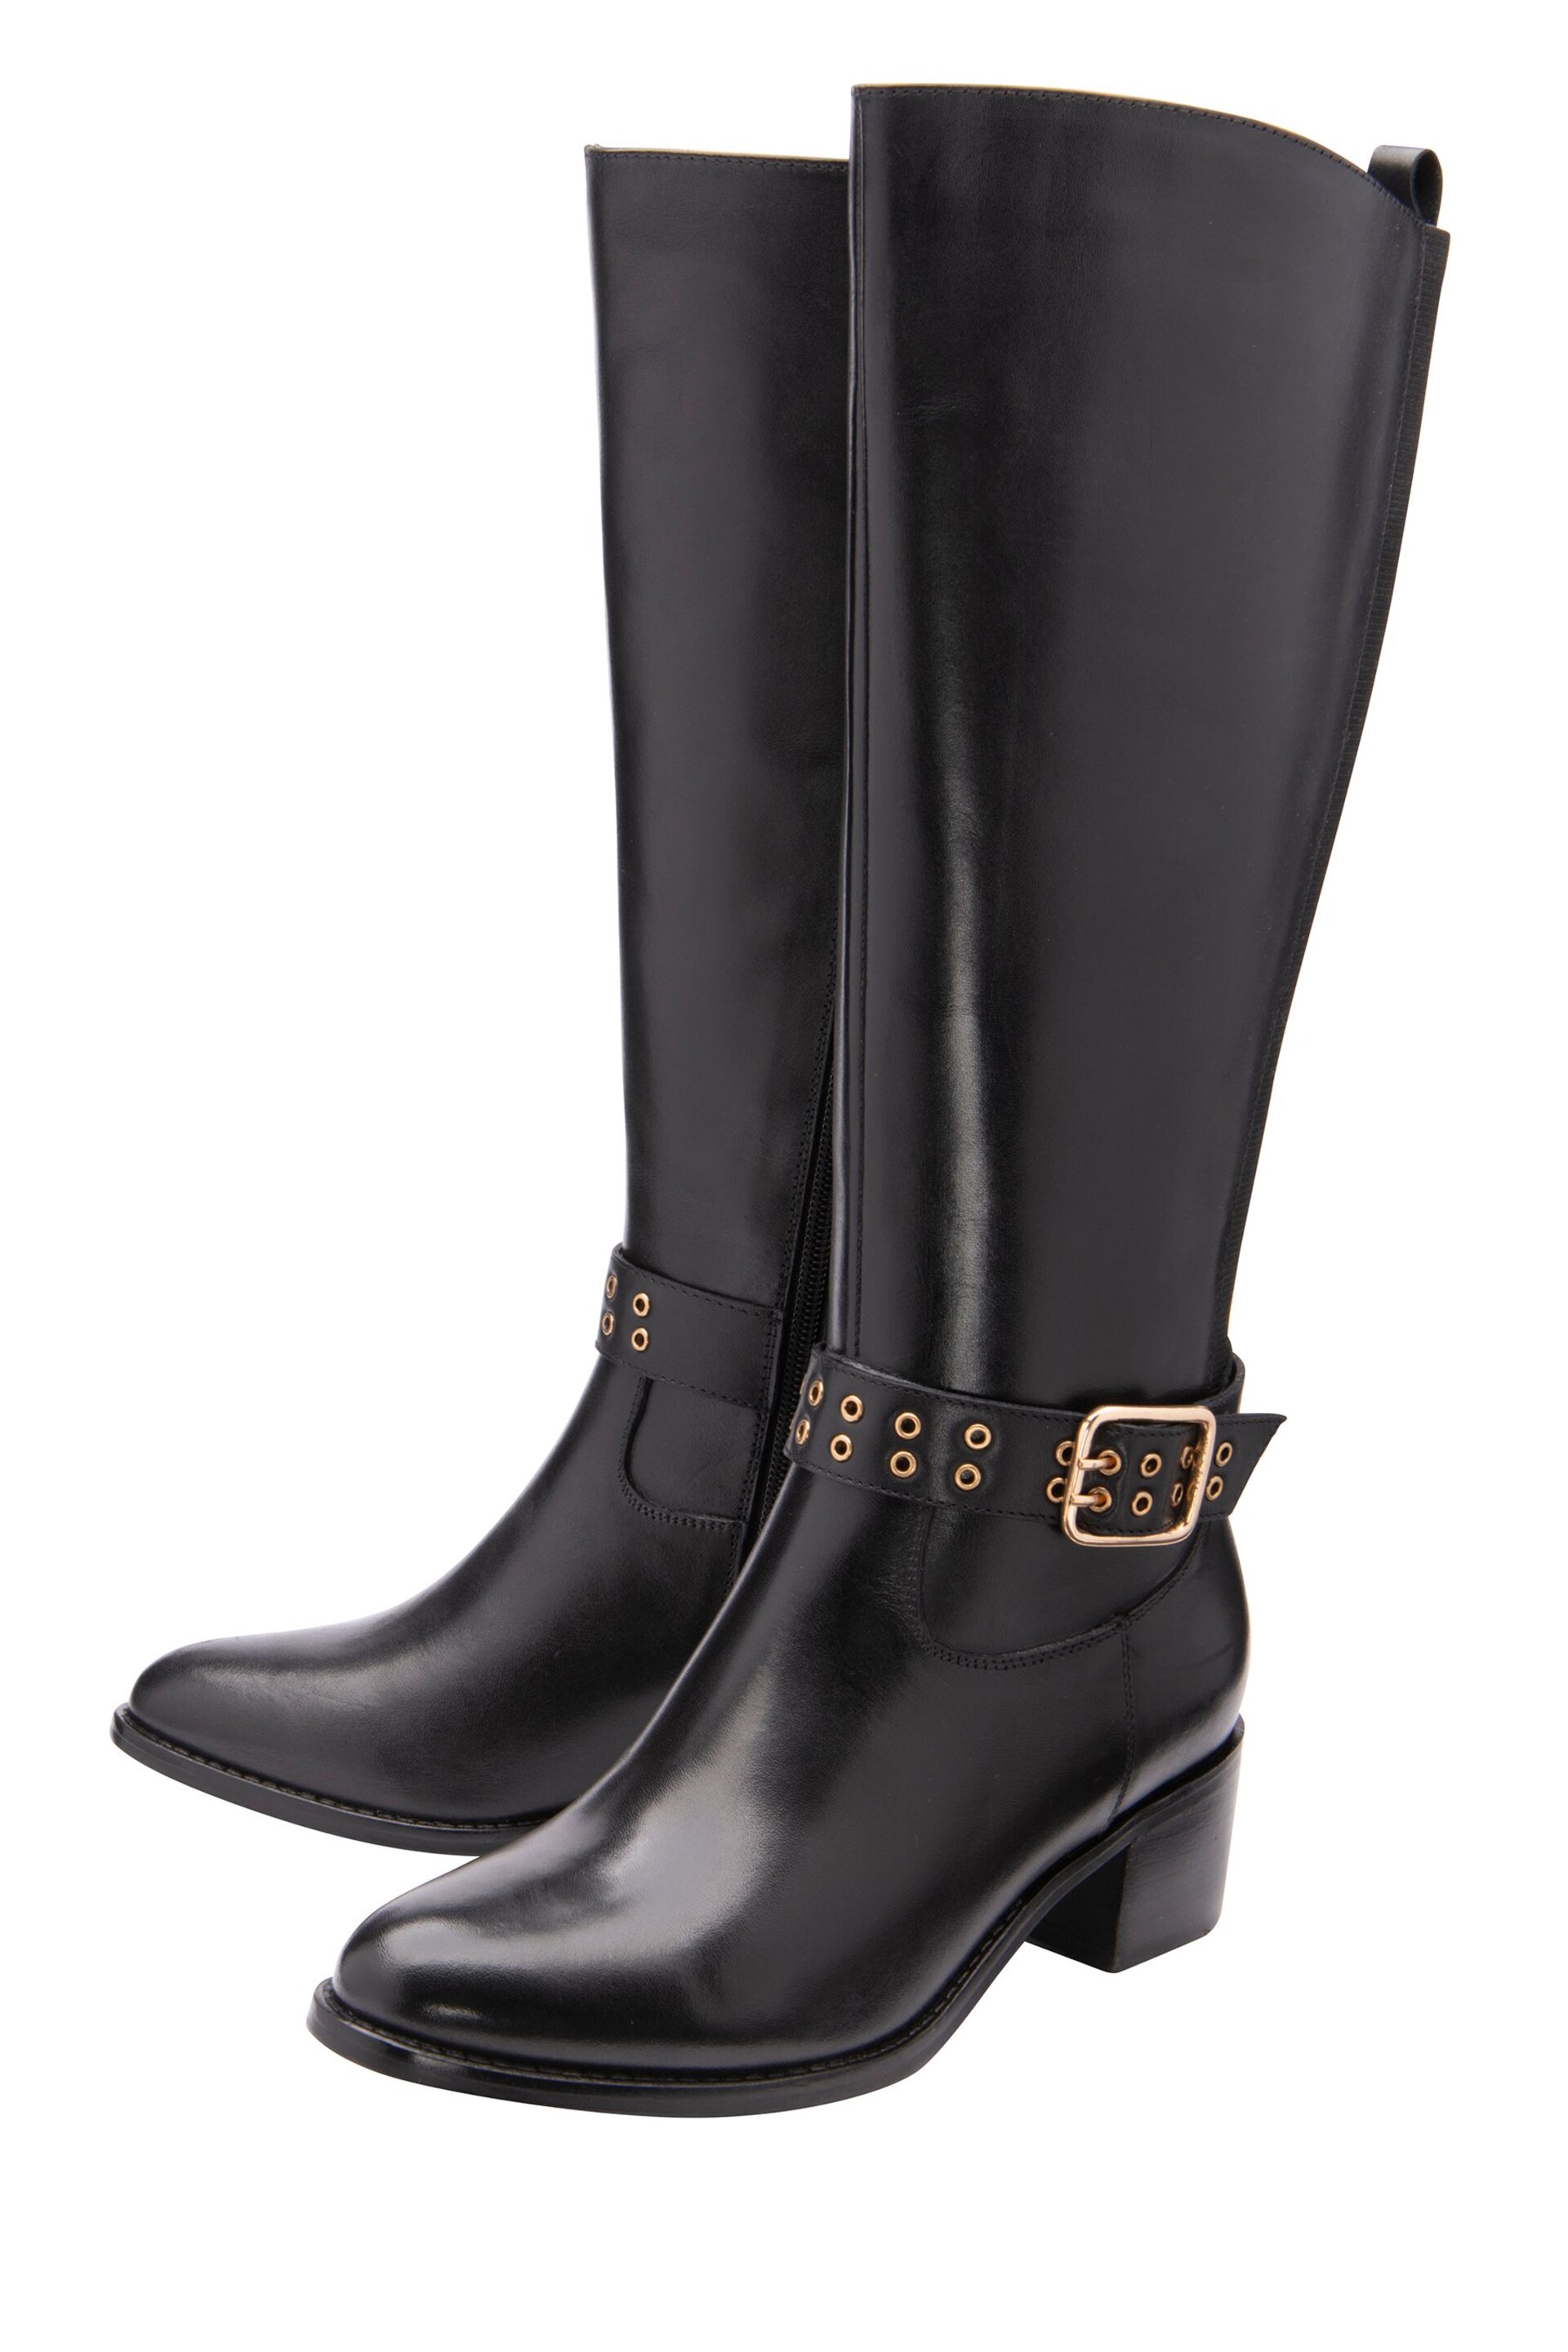 Ravel Black Leather Zip-Up Knee High Boots - Image 2 of 4